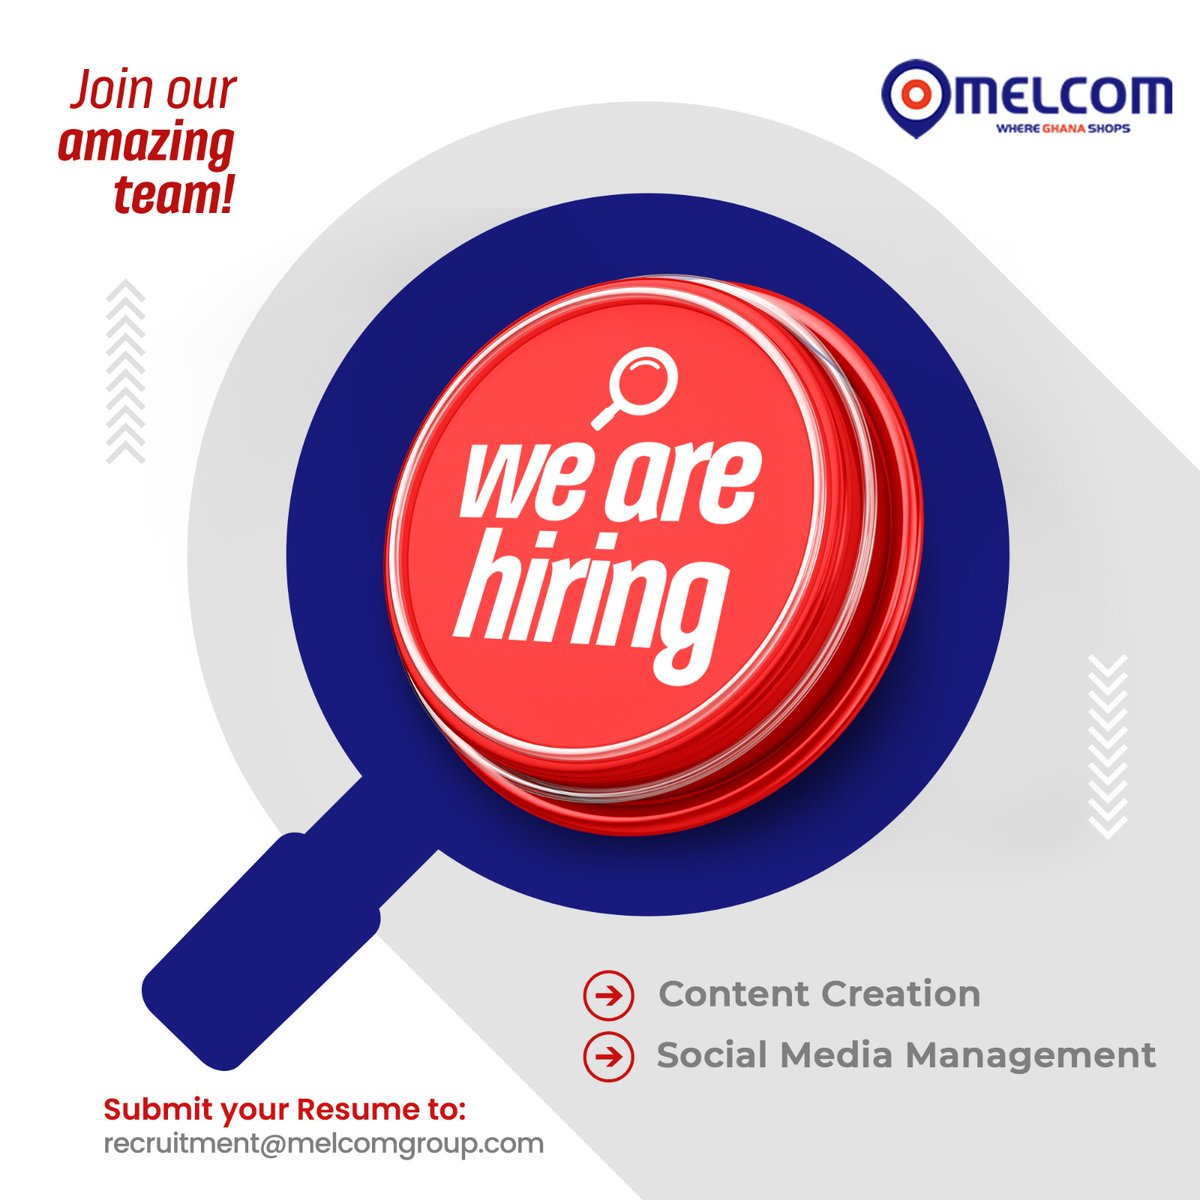 Are you a social media guru with a track record of driving engagement and growth? Or, are you a creative individual with a passion for content creation? Then send your CV to recruitment@melcomgroup.com to apply today!